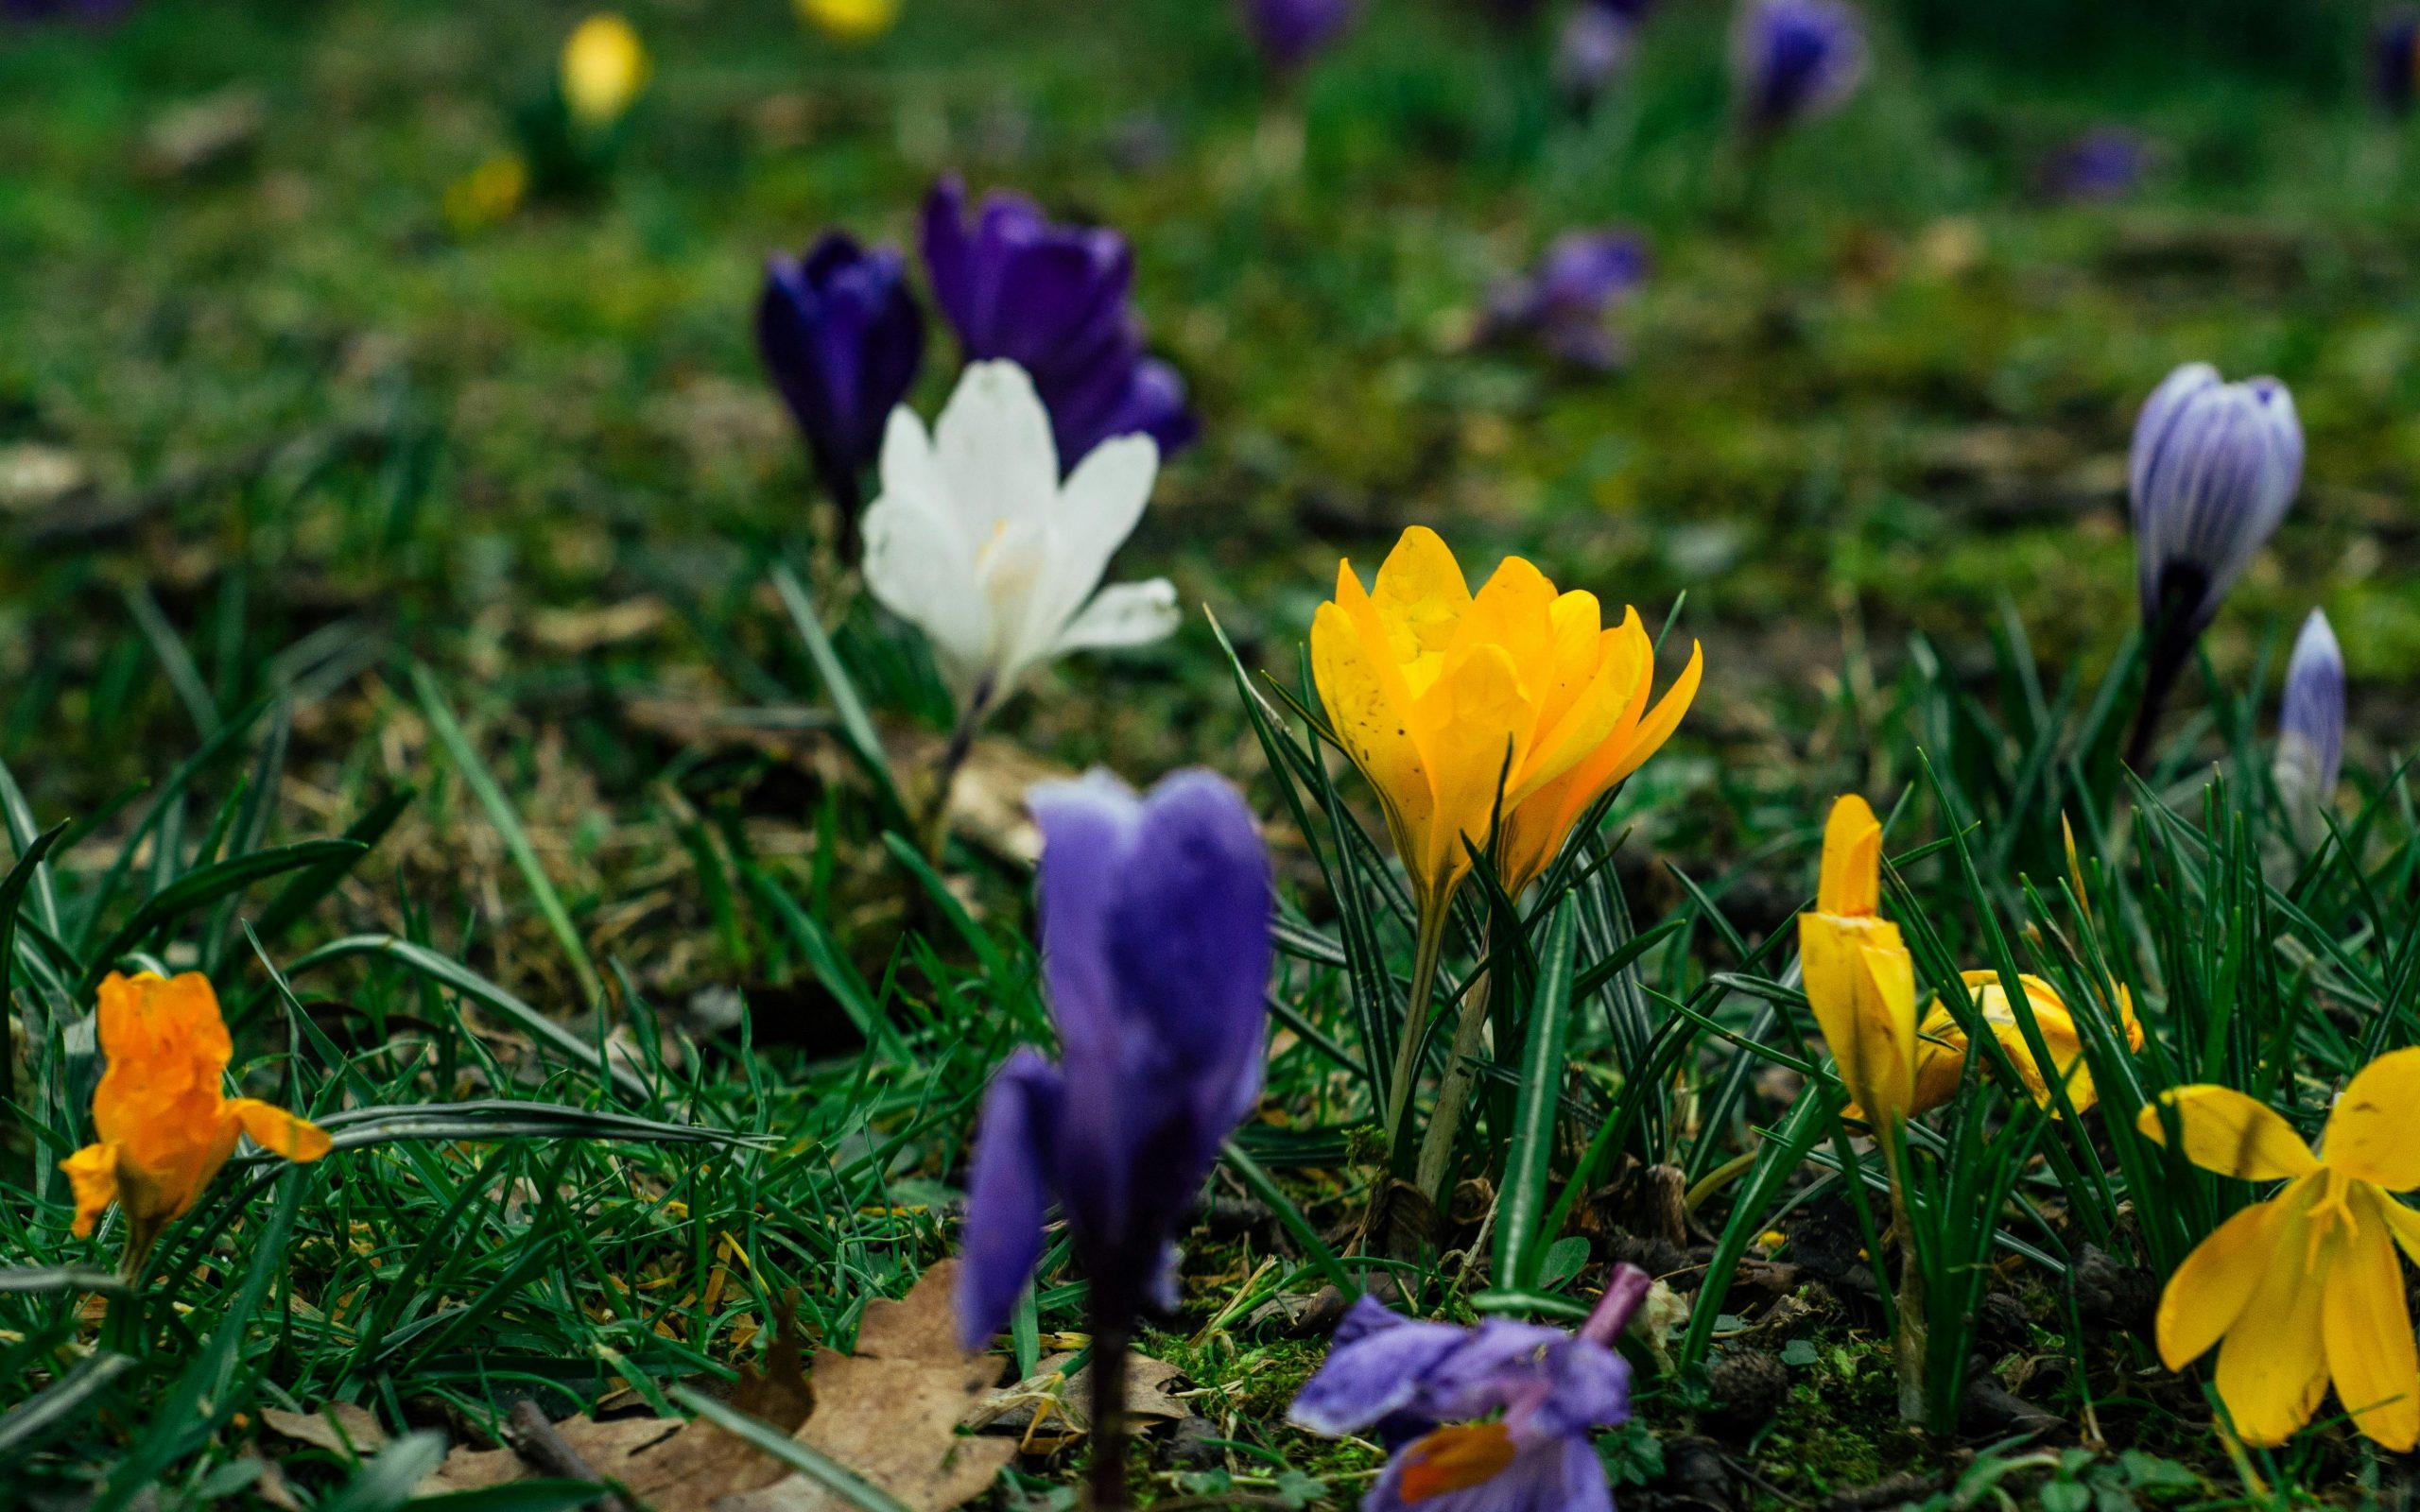 A photograph of yellow, purple, and white flowers in a field of grass.